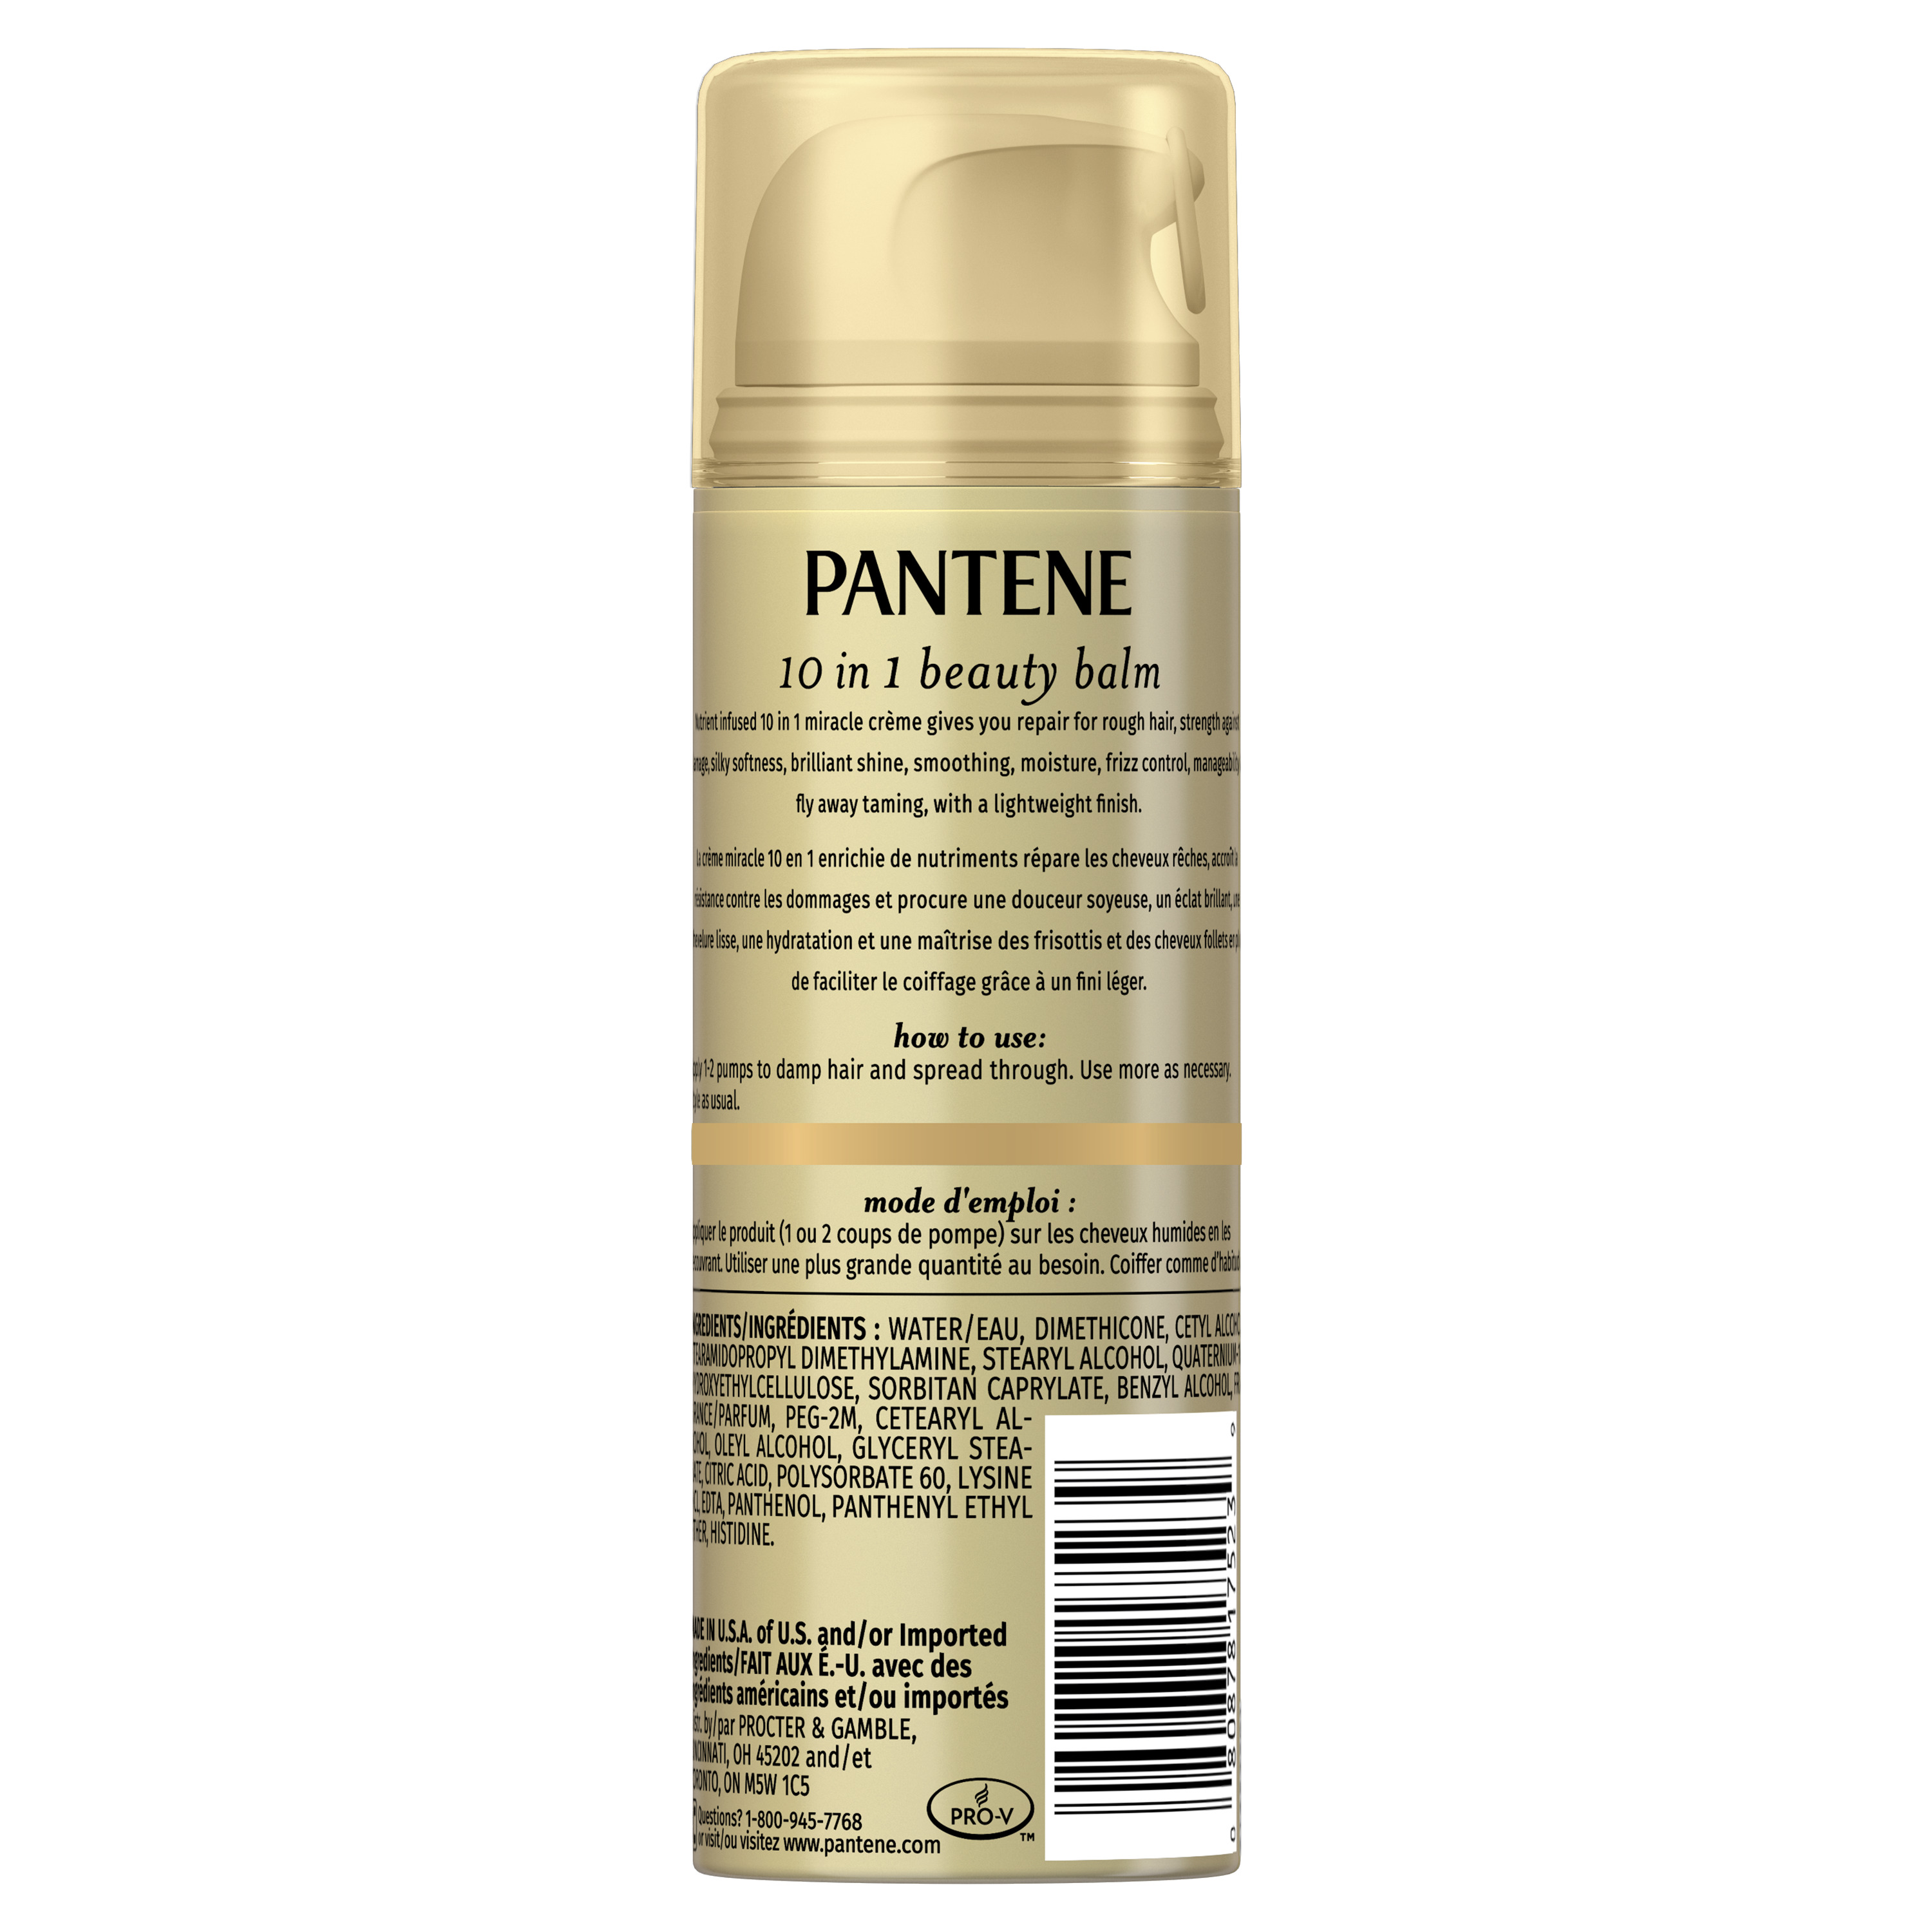 Pantene Pro-V Nutrient Boost 10 in 1 Beauty for Softness, Strength and Shine, 5.1 fl oz - image 2 of 7